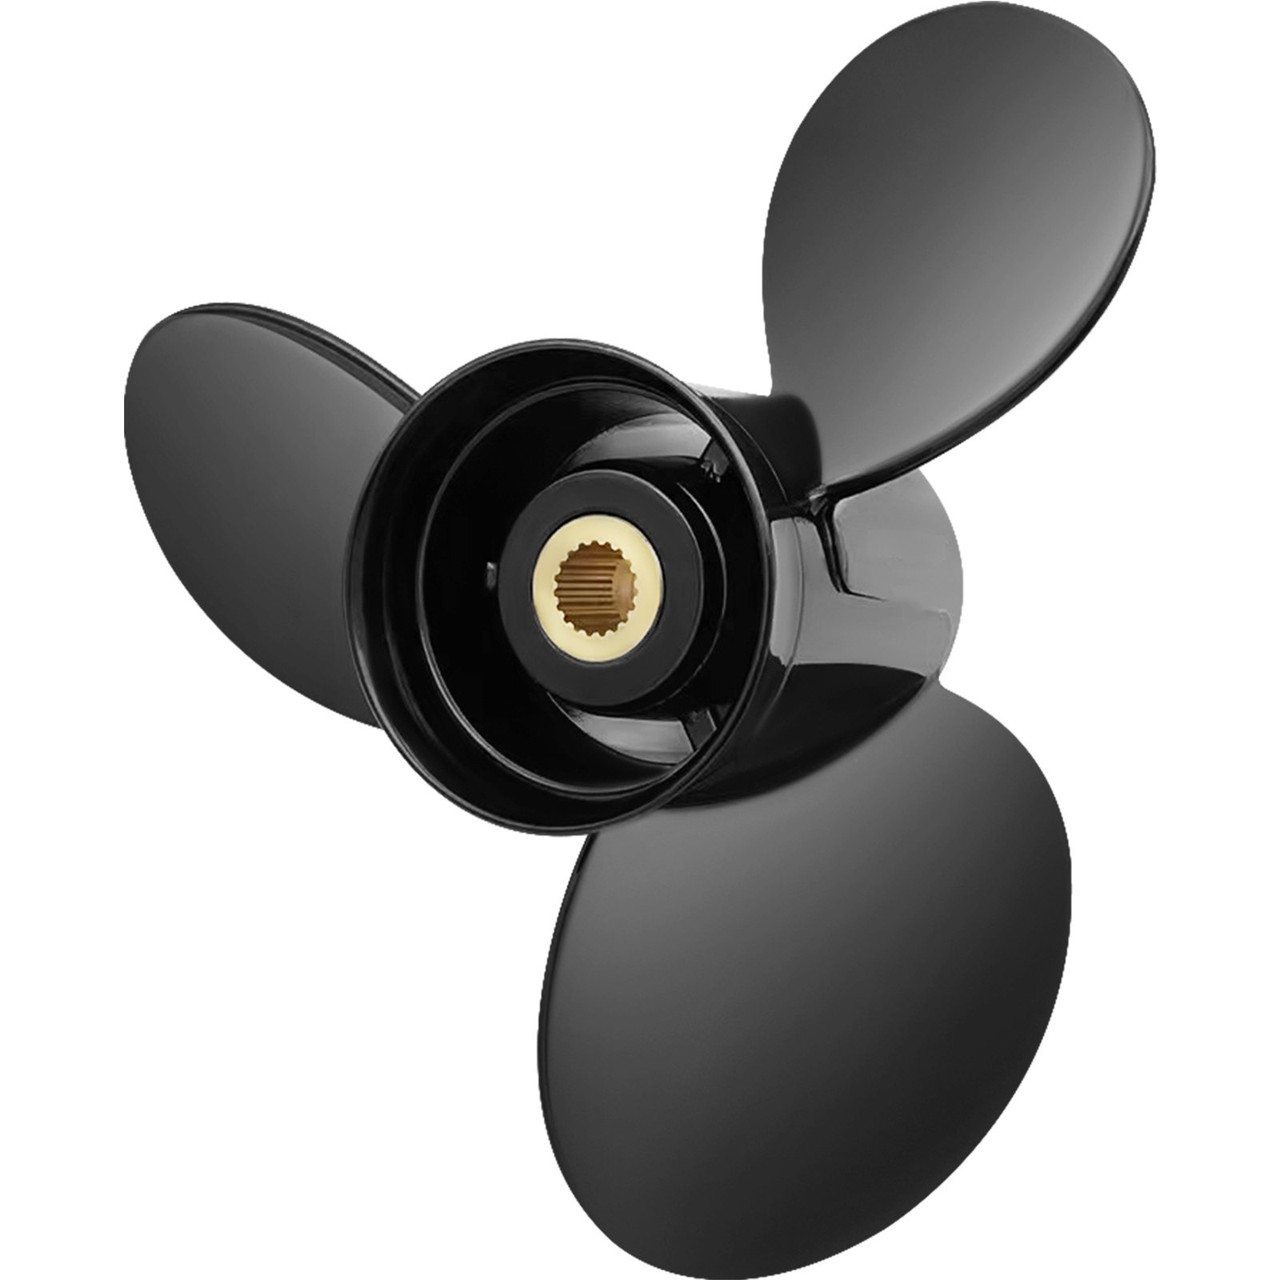 VEVOR Outboard Propeller, Replace for OEM 3817470, 3 Blades 14" x 23" Pitch Aluminium Boat Propeller, Compatible with Volvo Penta SX Drive All Models, with 19 Tooth Splines, RH